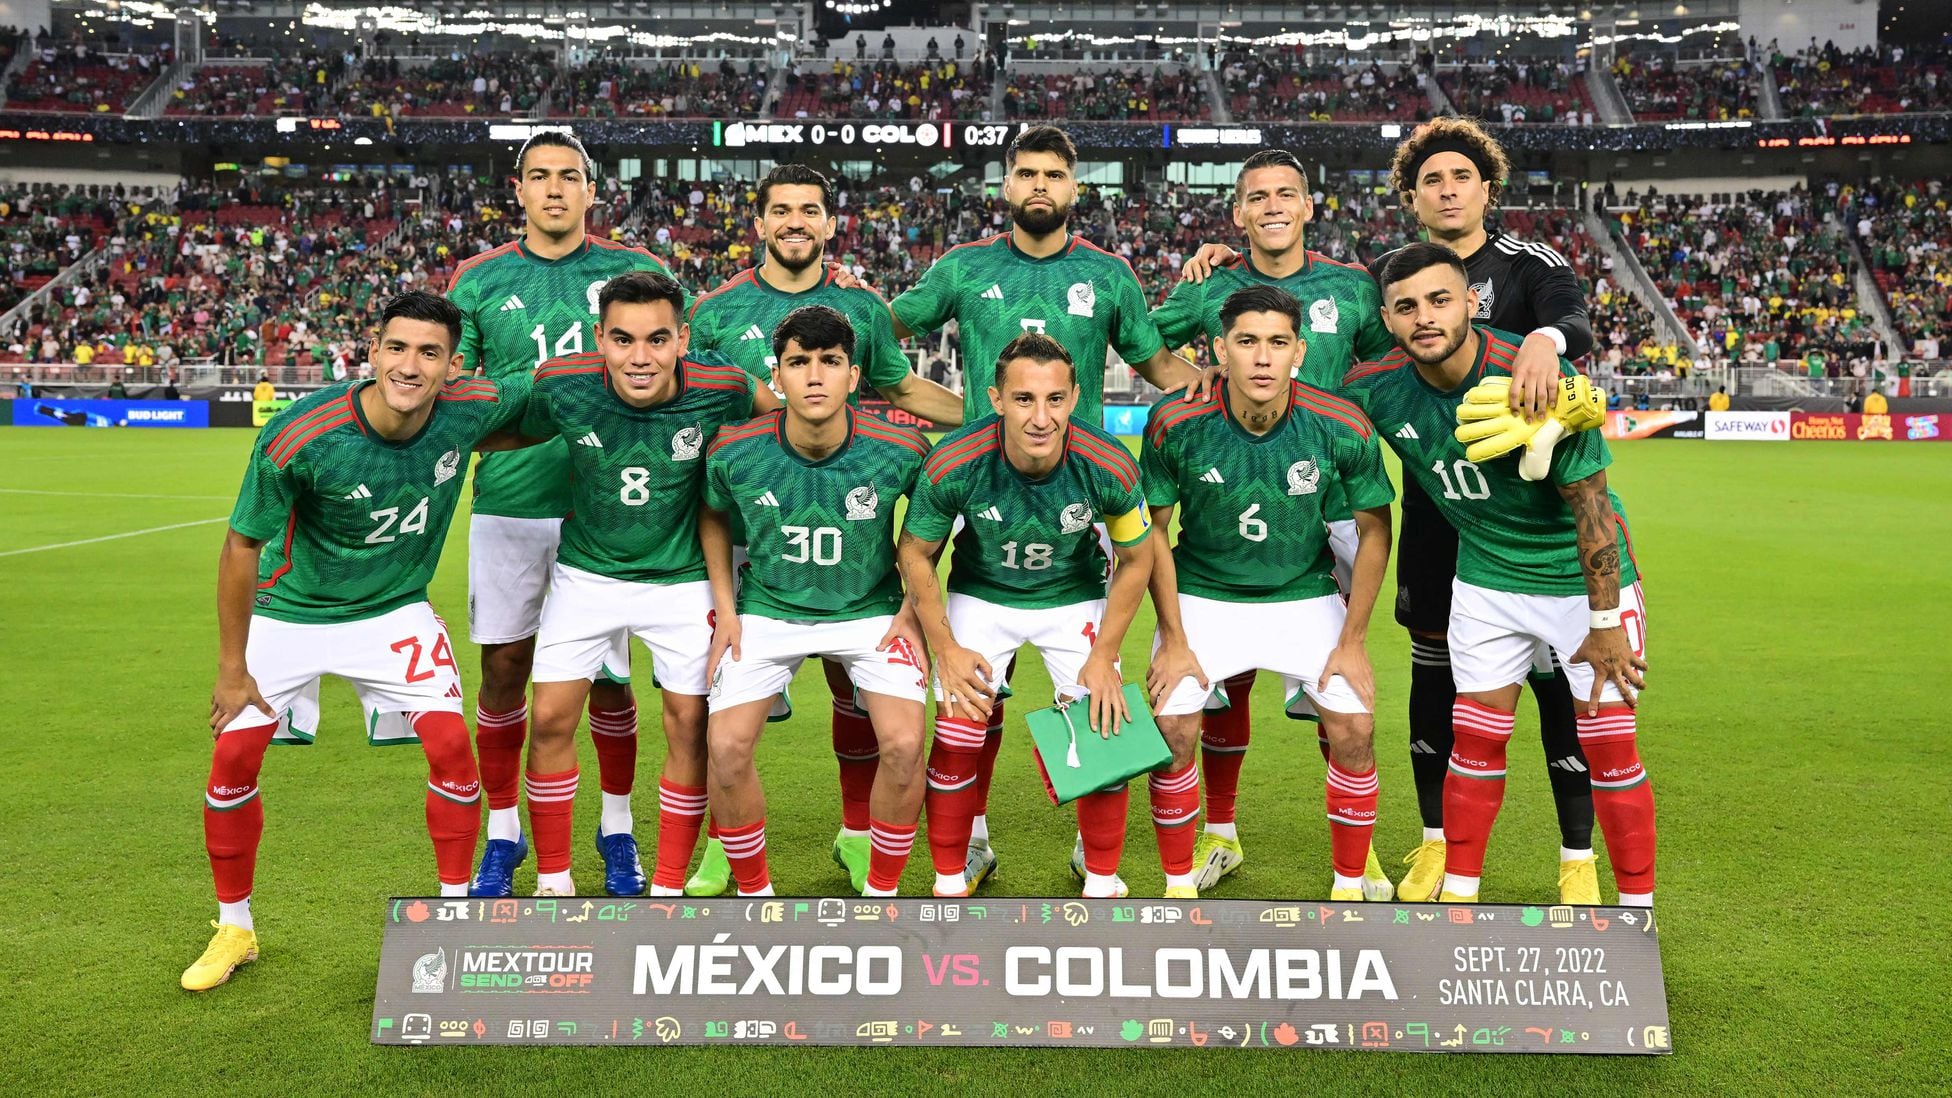 Mexico left with more questions than answers as World Cup looms - AS USA